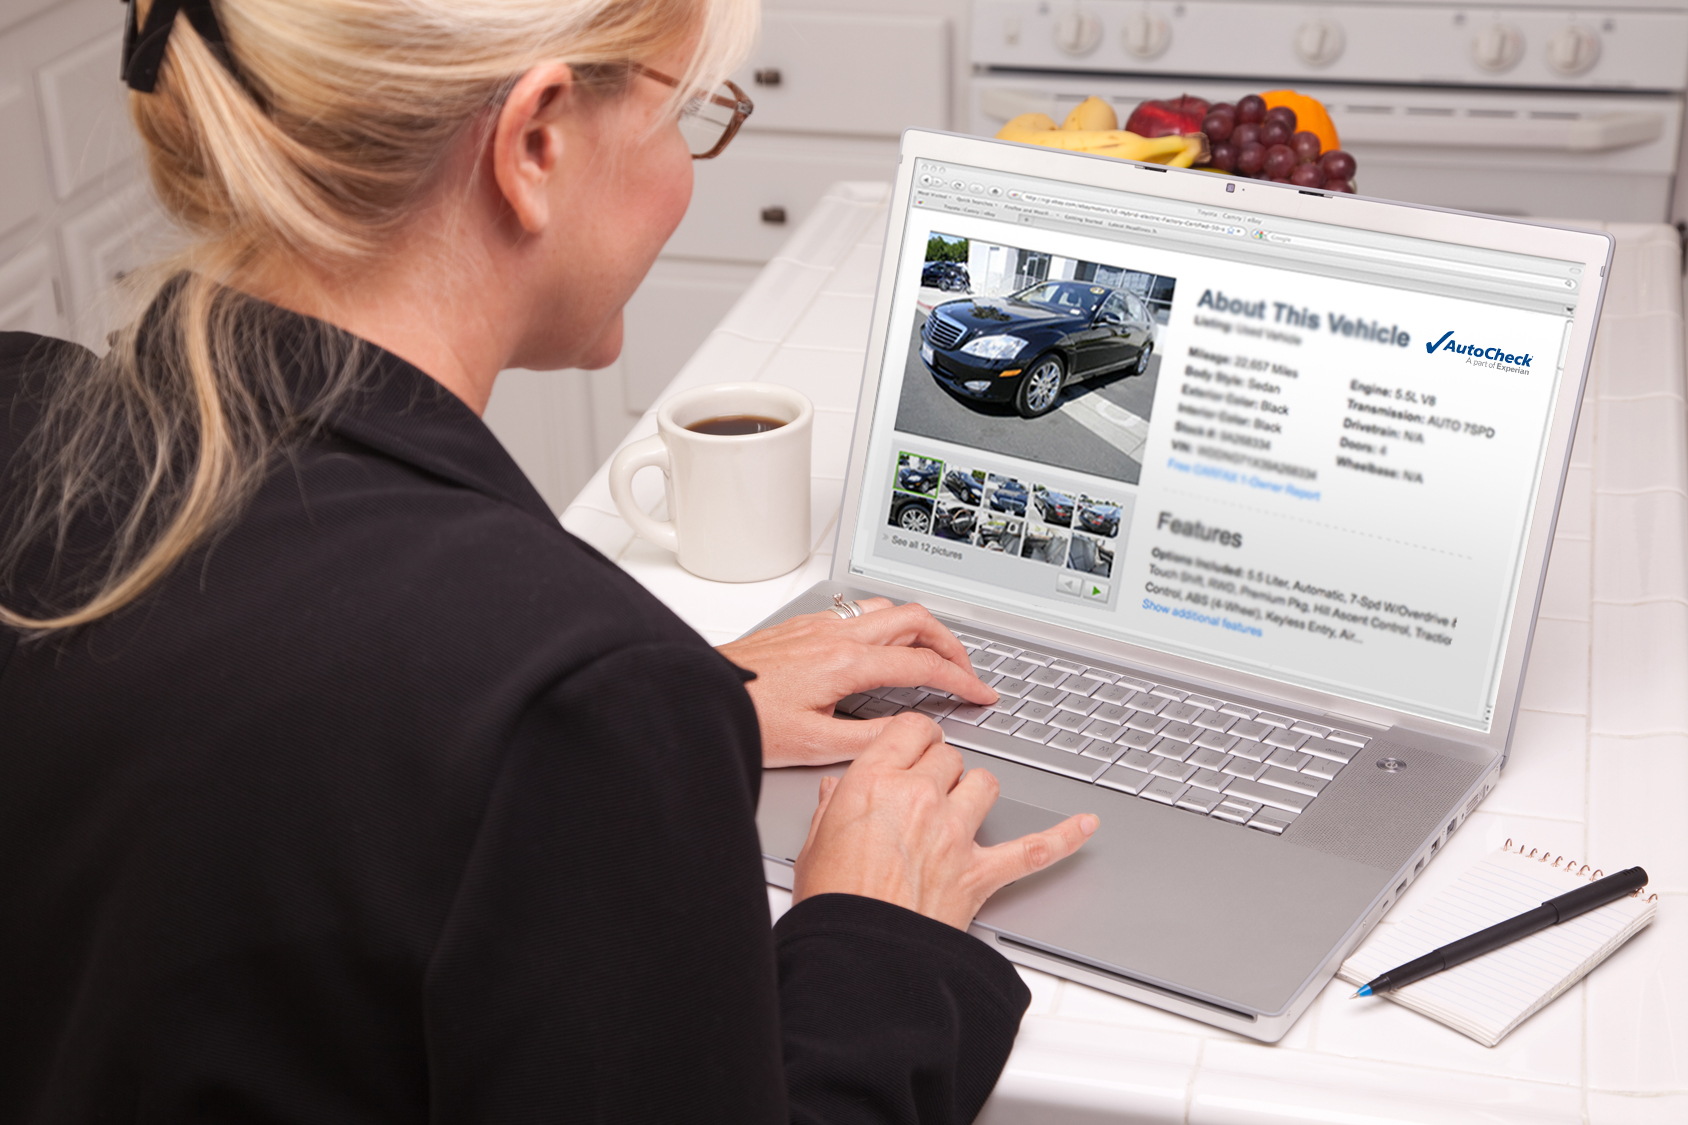 Online car shopping biz gets Shorewood OK | The Times Weekly | Community Newspaper in ...